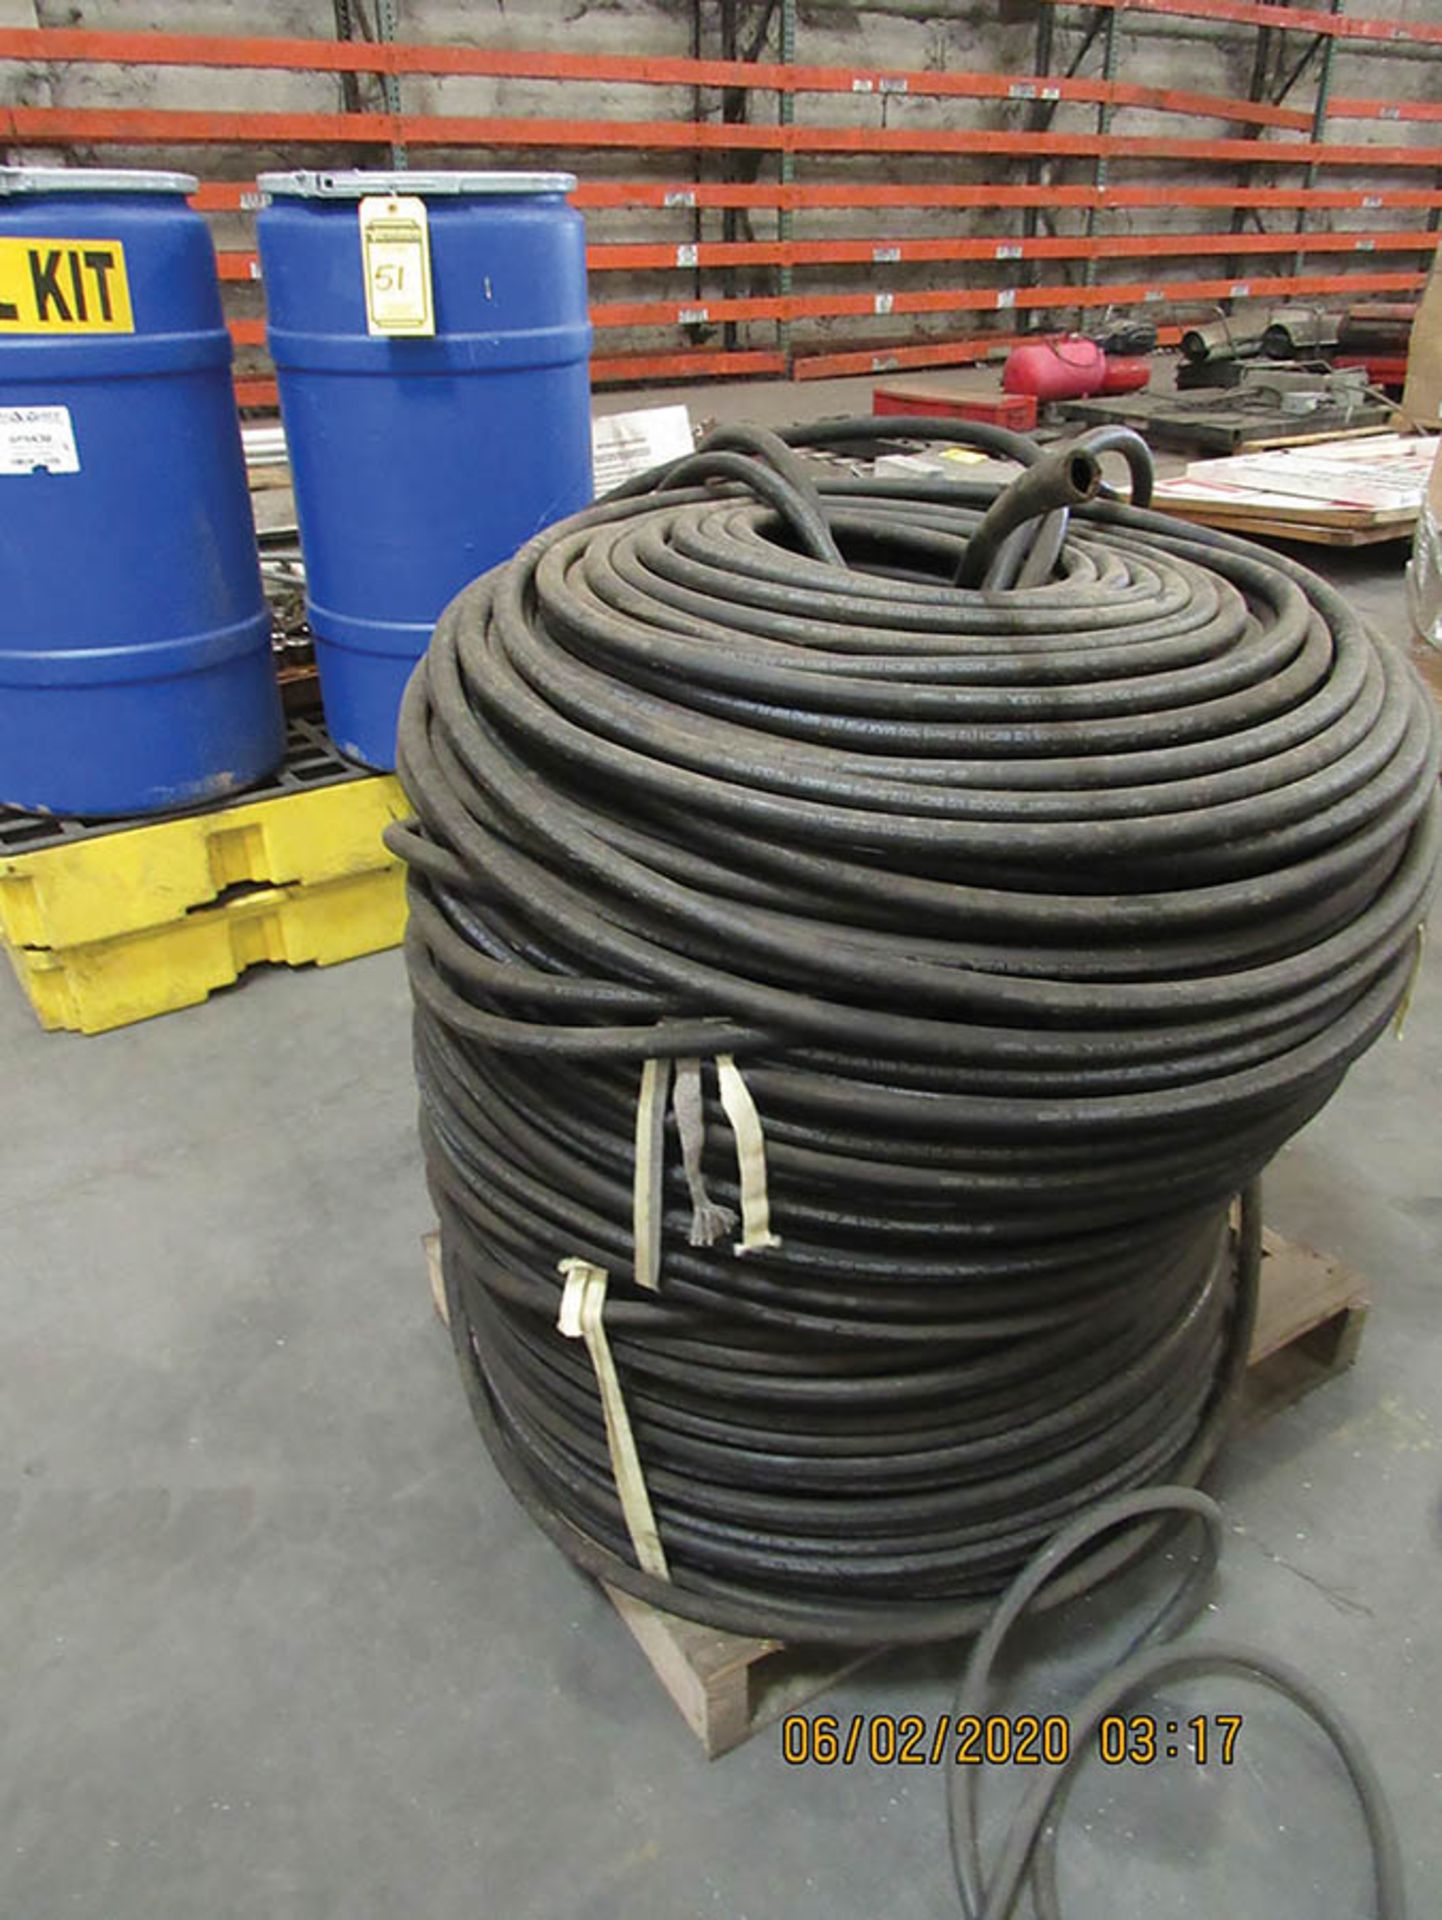 LARGE QUANTITY OF HOSE, GATES CONNECTED M500-08 1/2 (AS.5MM) 500 PSI WP FLAME RESISTANT - Image 3 of 3